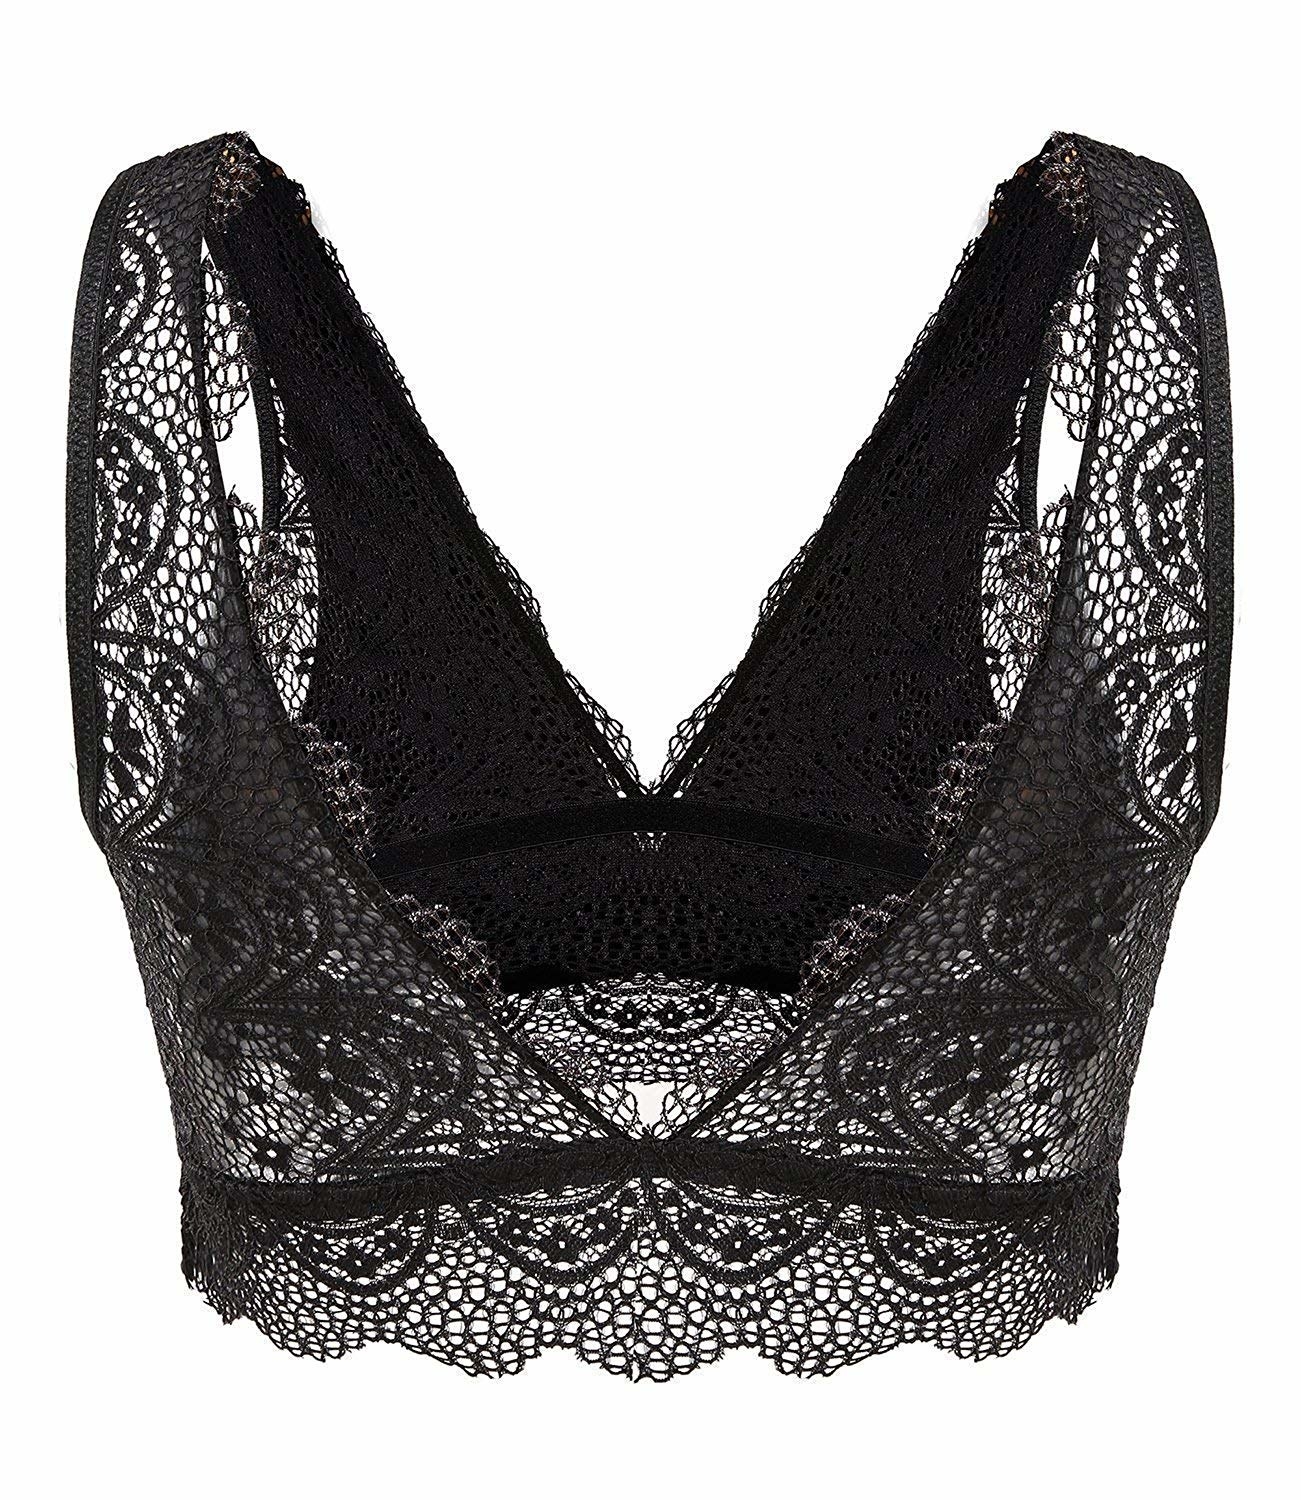 26 Bralettes That Are Sure To Make You Breakup With Your Underwire Bras